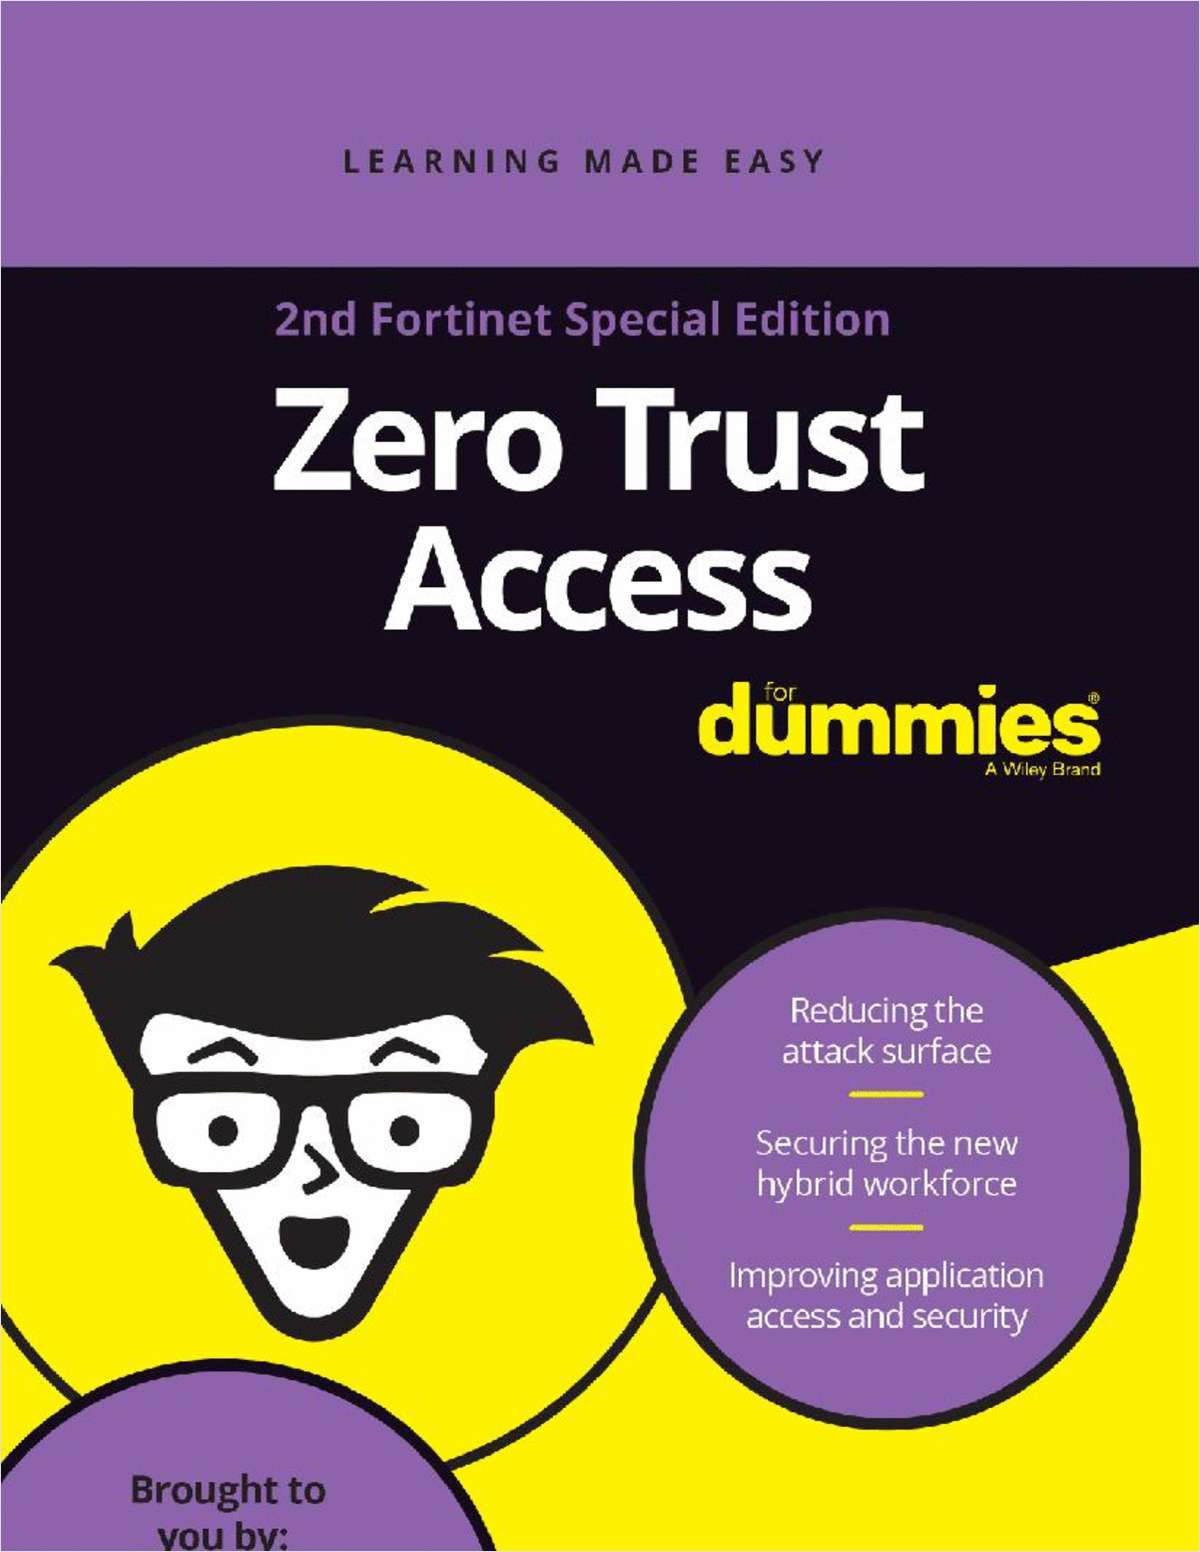 Zero Trust Access For Dummies, 2nd Fortinet Special Edition